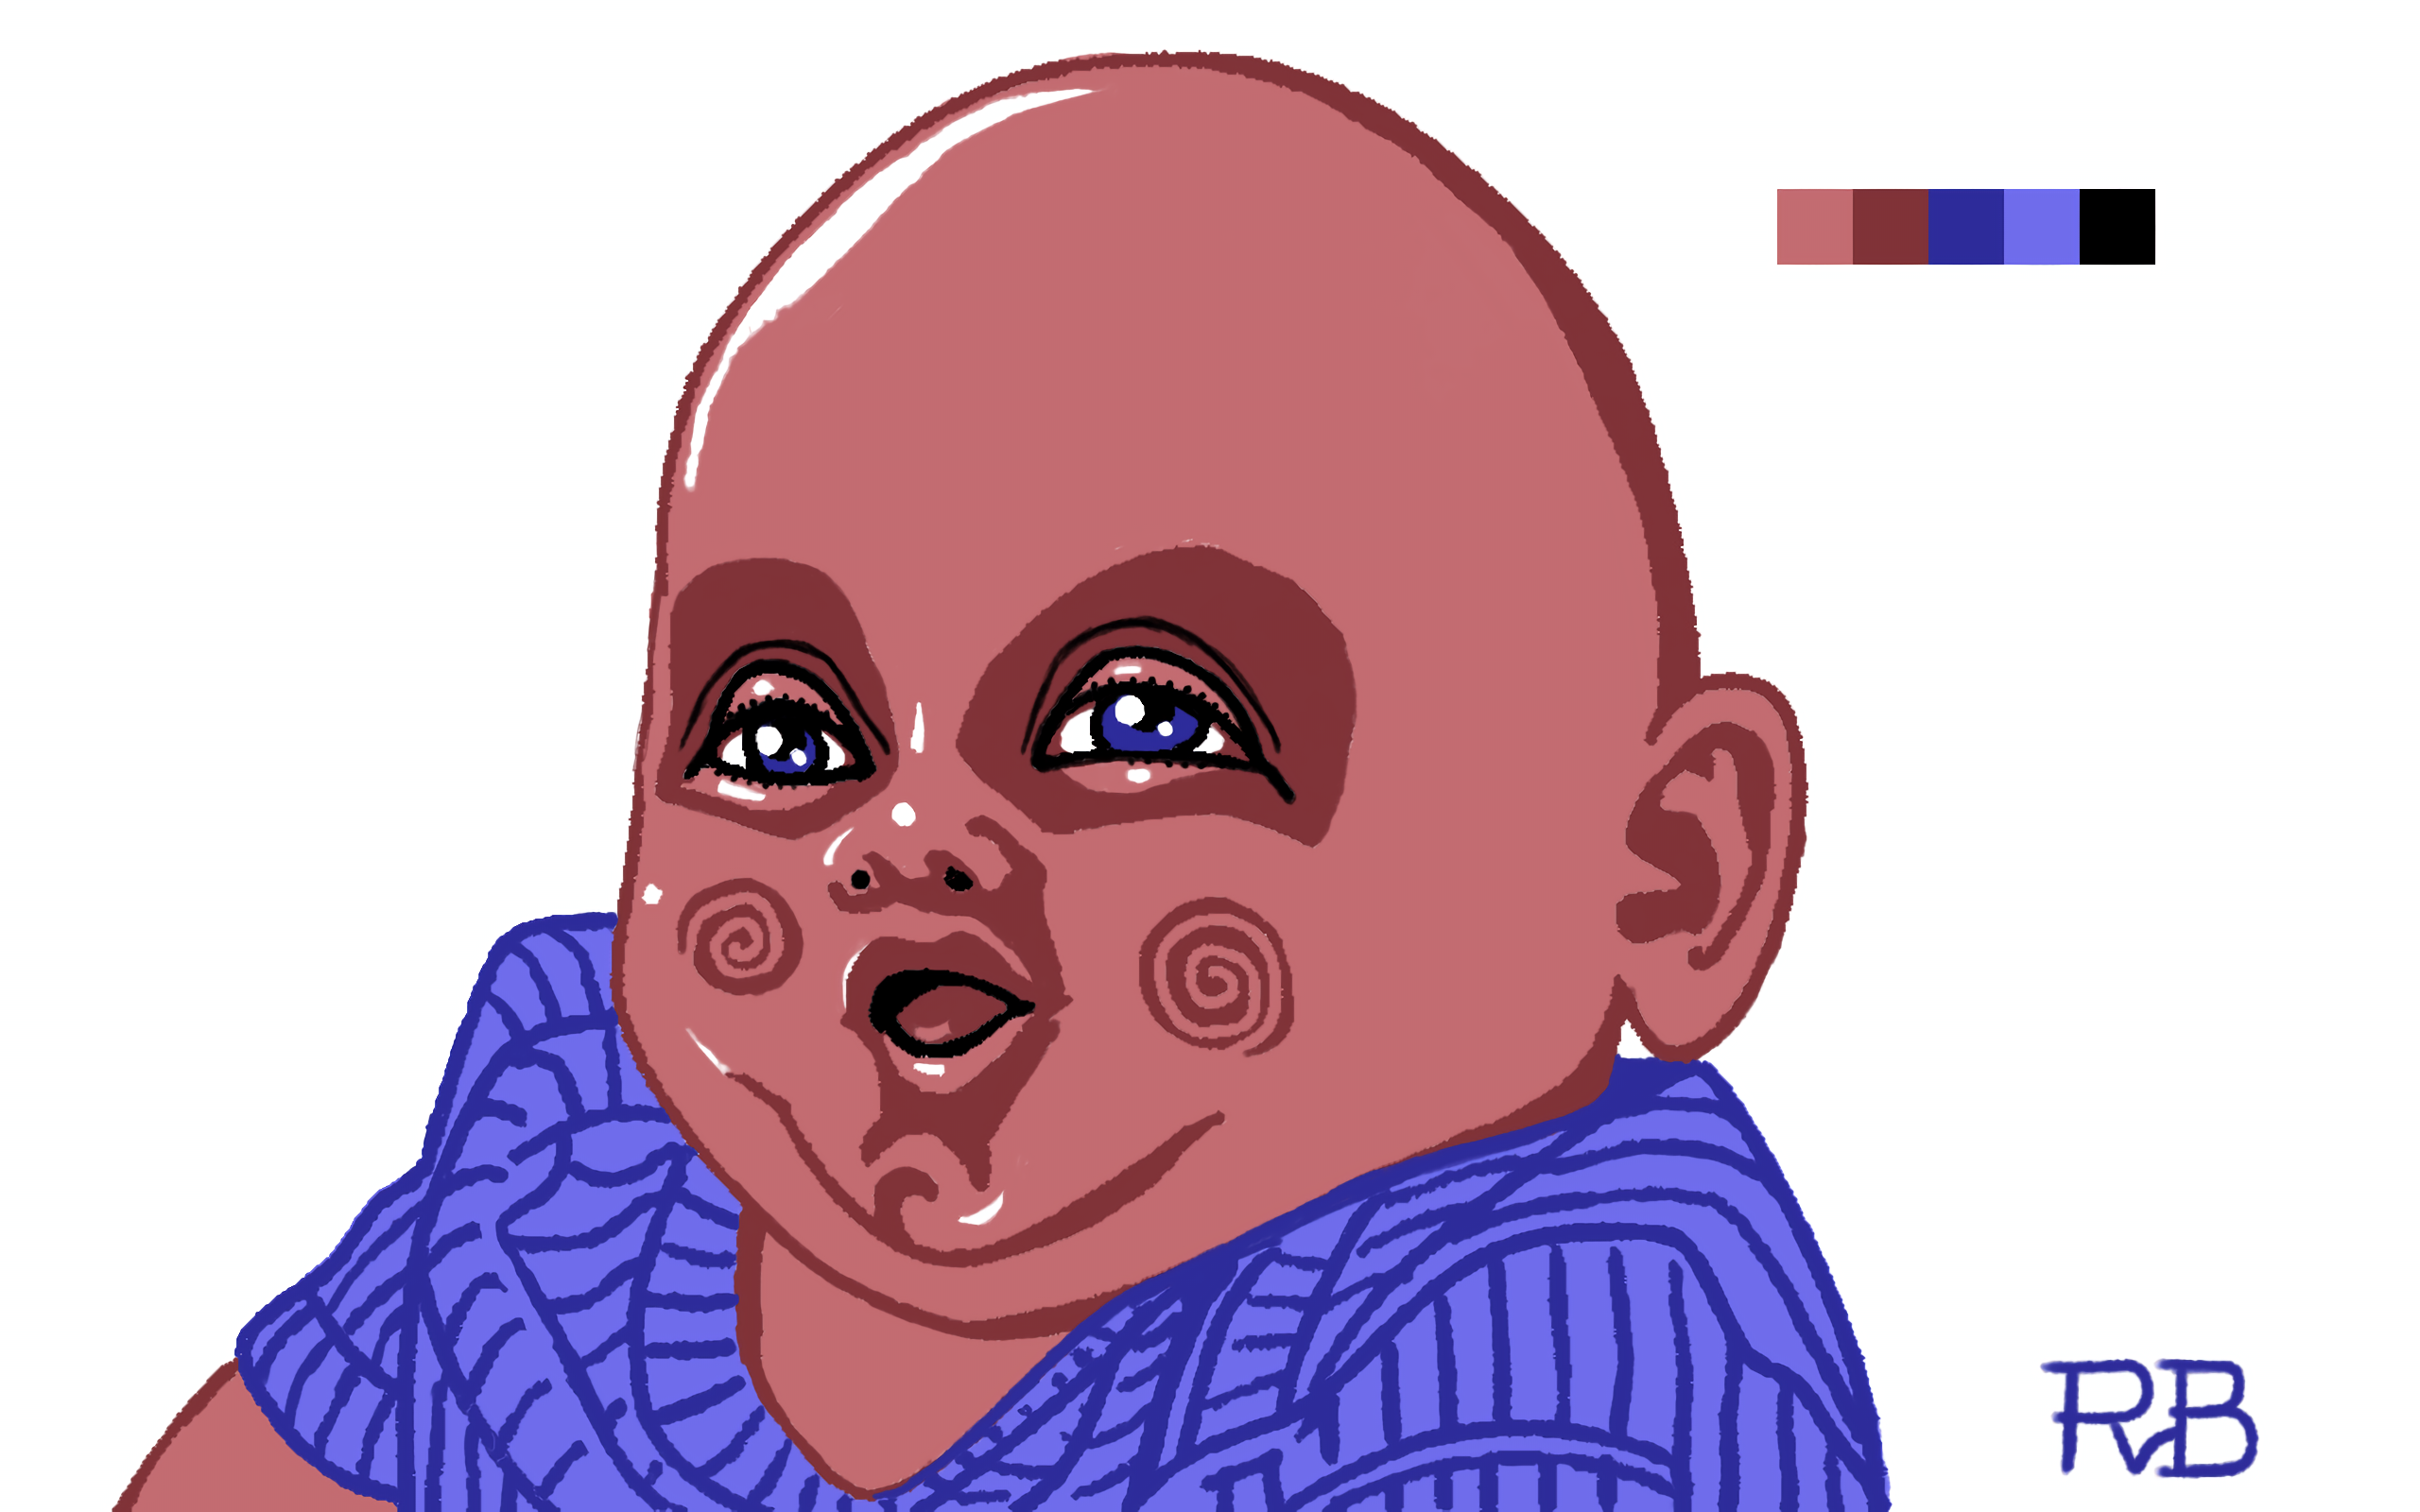 illustration of a baby